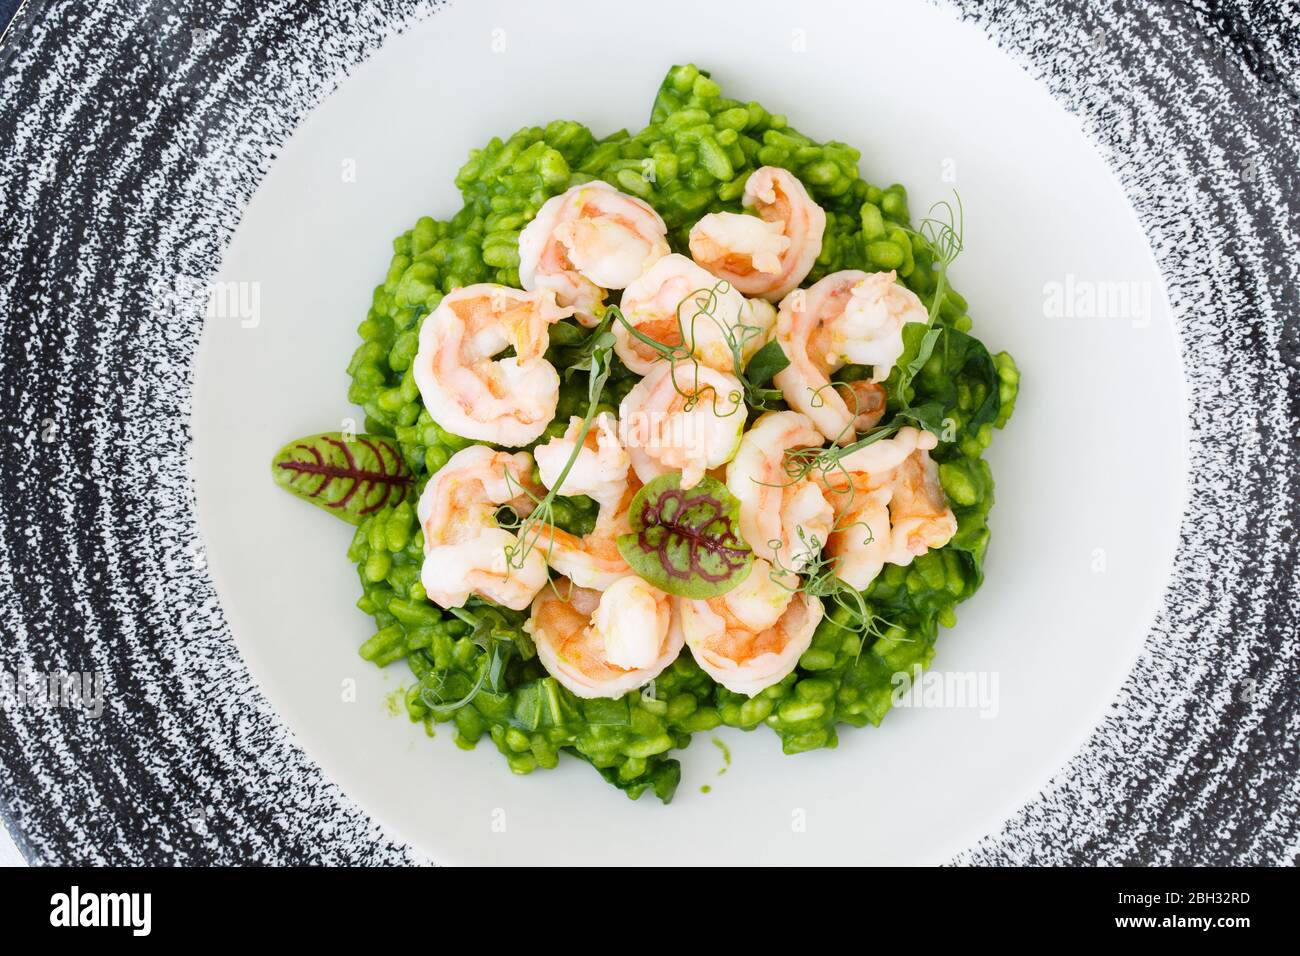 Risotto with basil and shrimp decorated with microgreens in a plate. Stock Photo